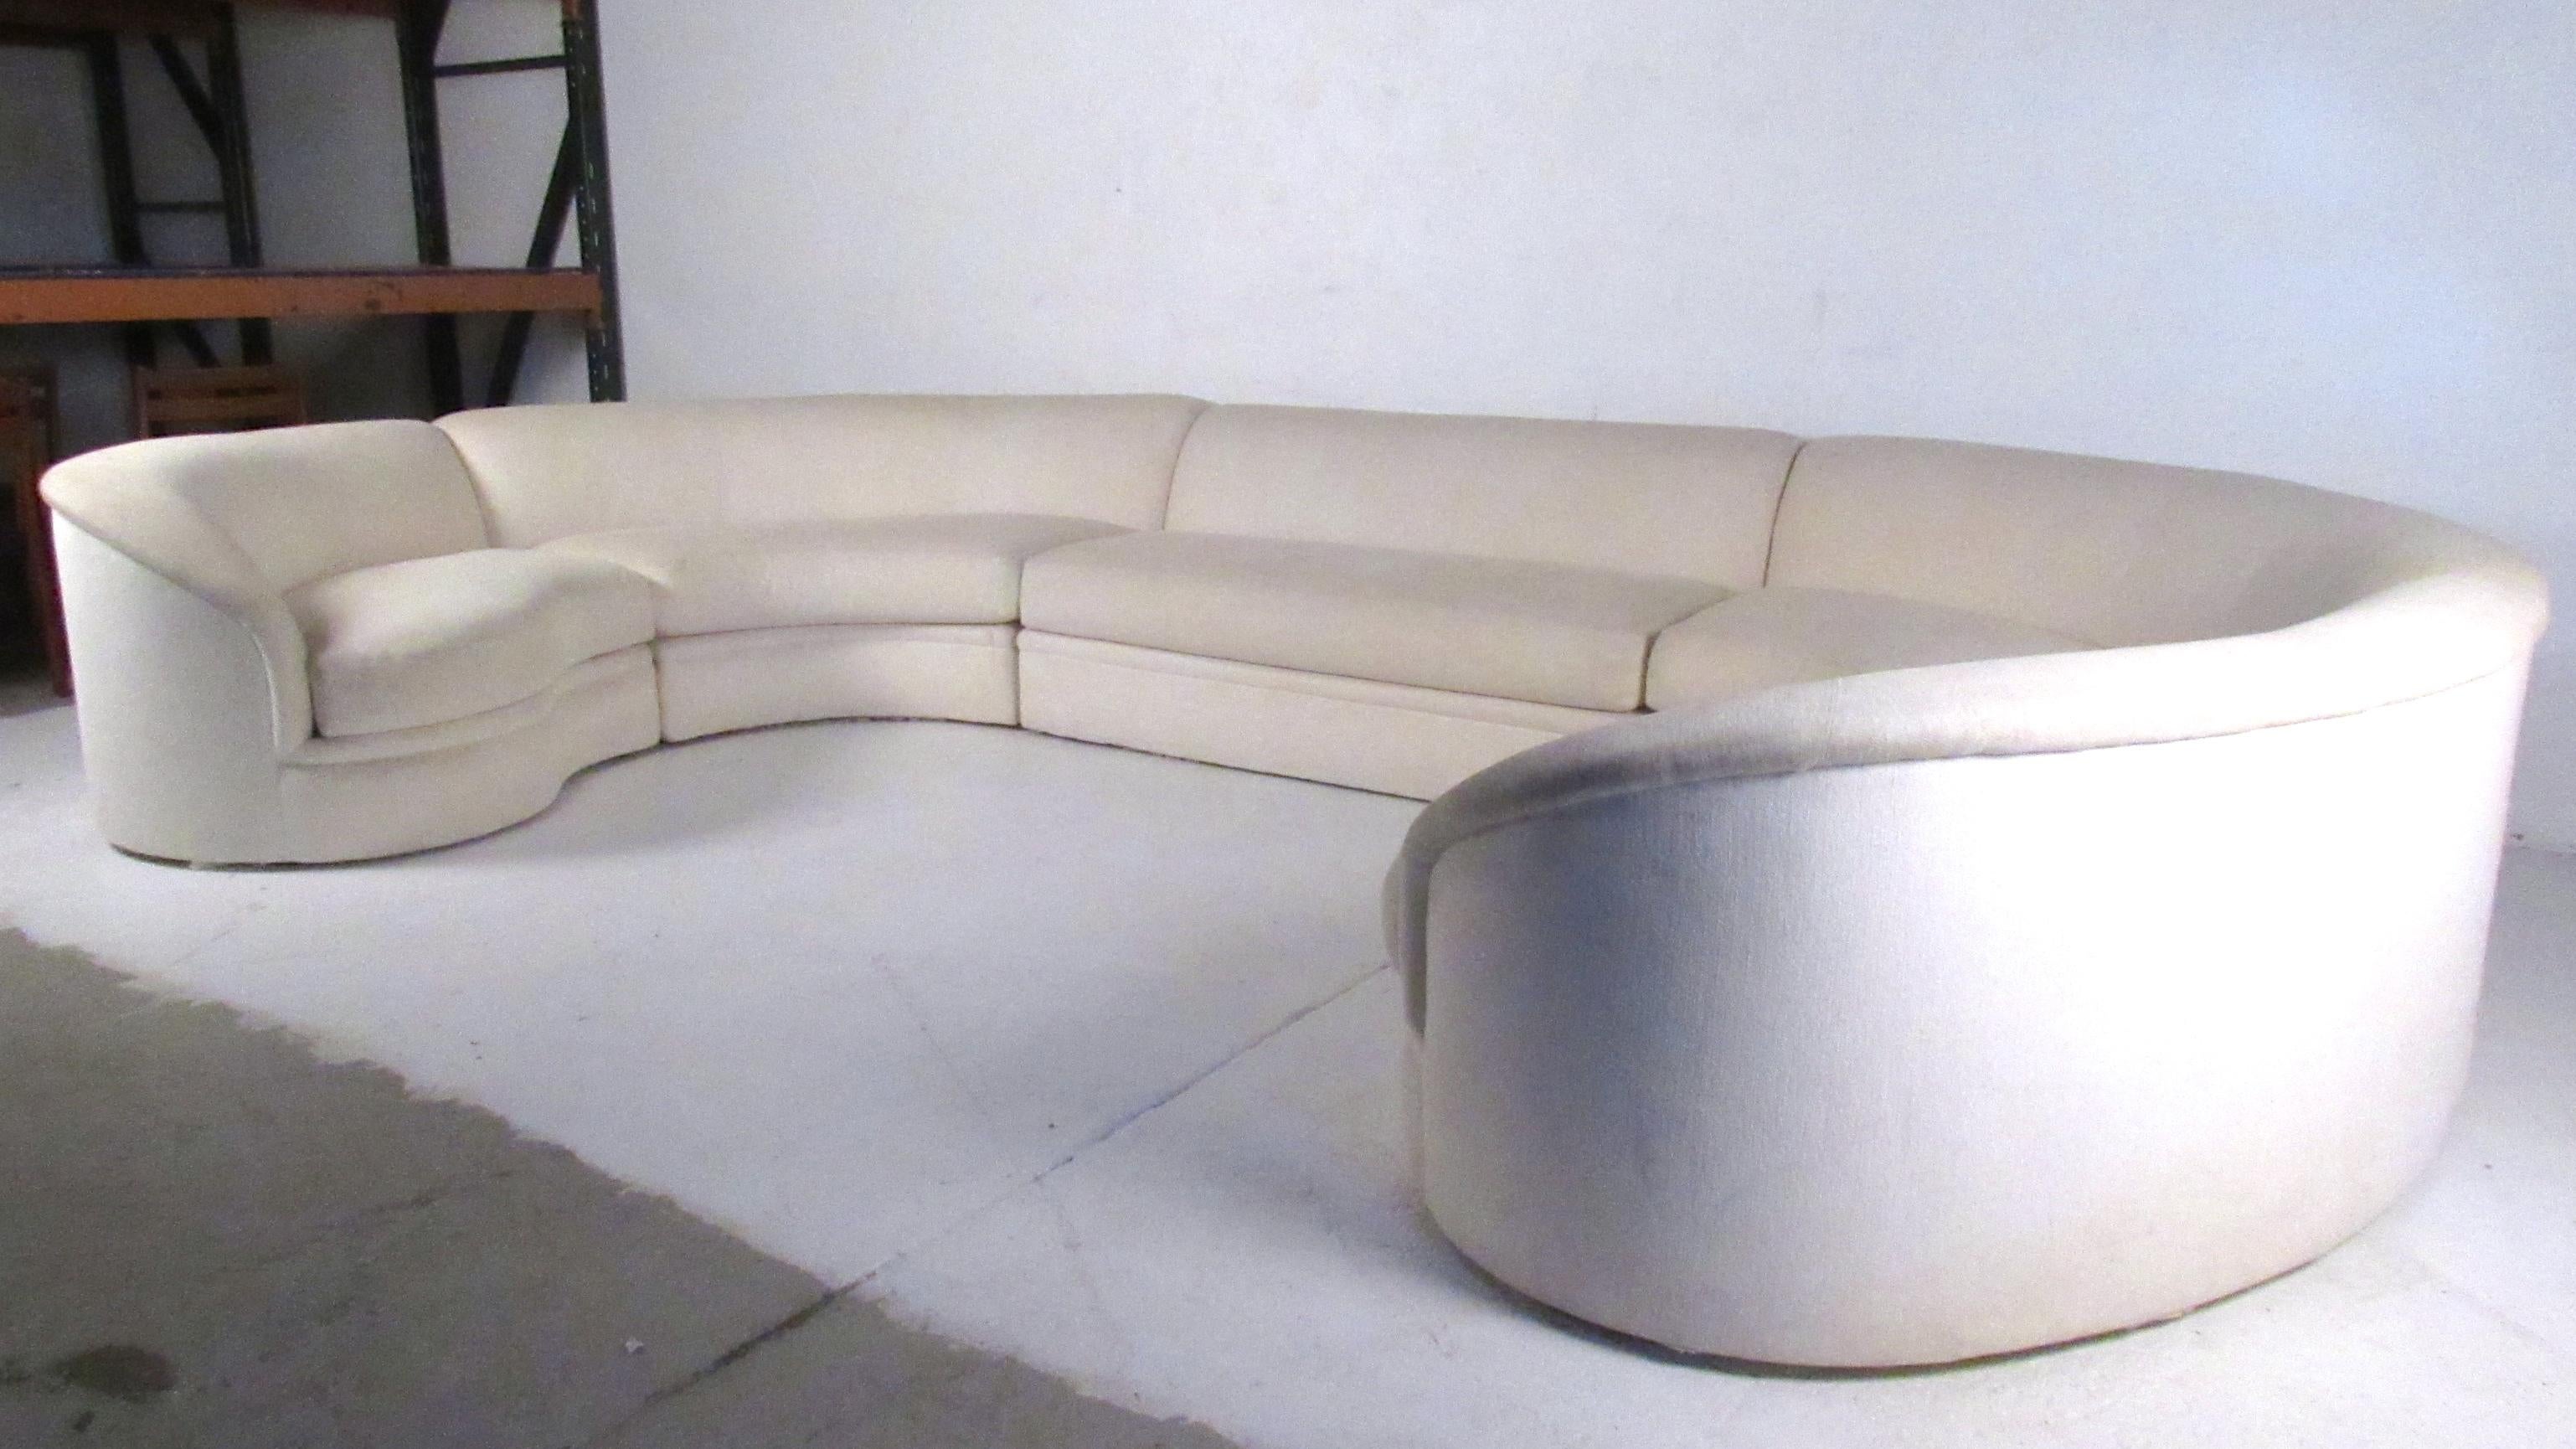 This stunning midcentury sectional sofa boasts striking modern design and makes an impressive sofa for spacious business or home seating areas. Designed for Directional by Vladimir Kagan the elegant simplicity of the piece combines comfort and